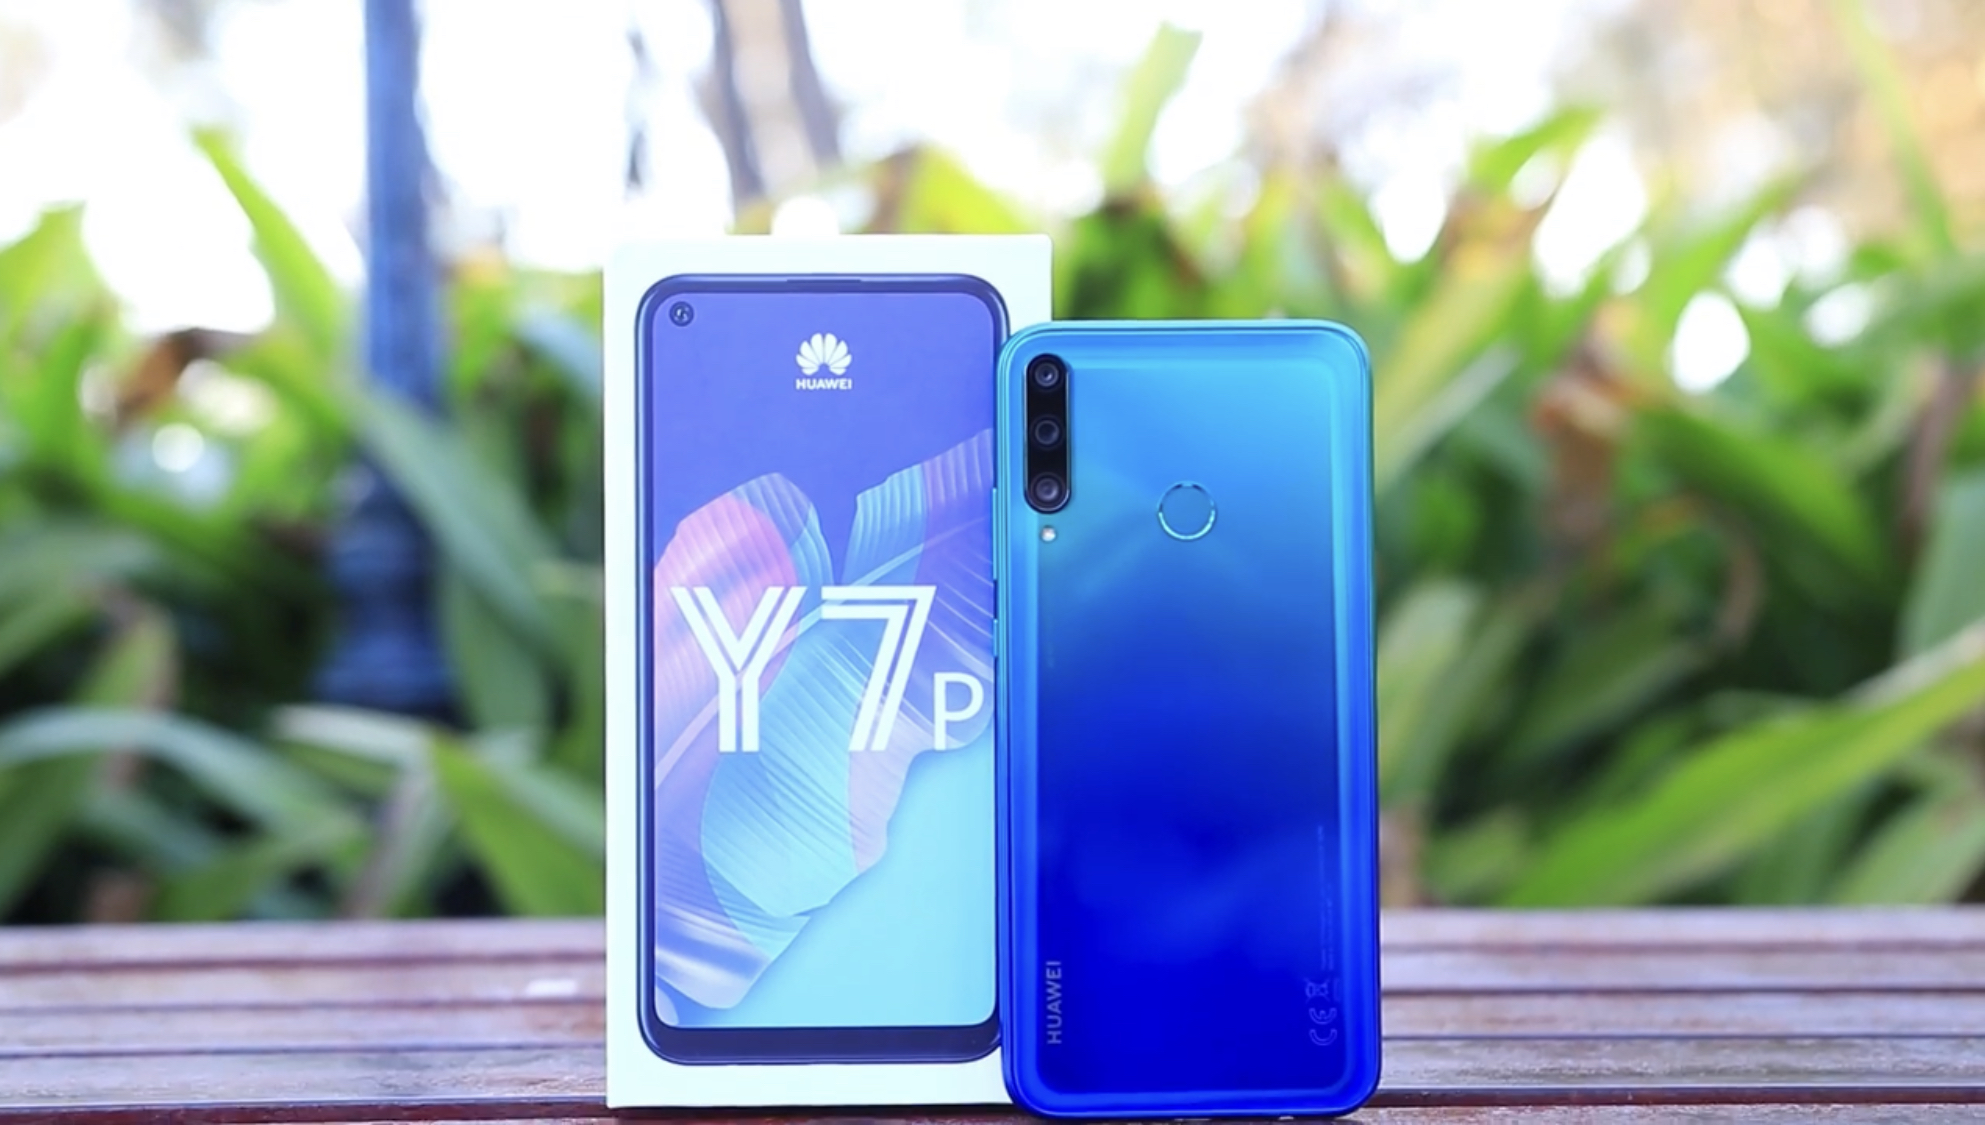 Huawei Y7P Price in Pakistan and Specs